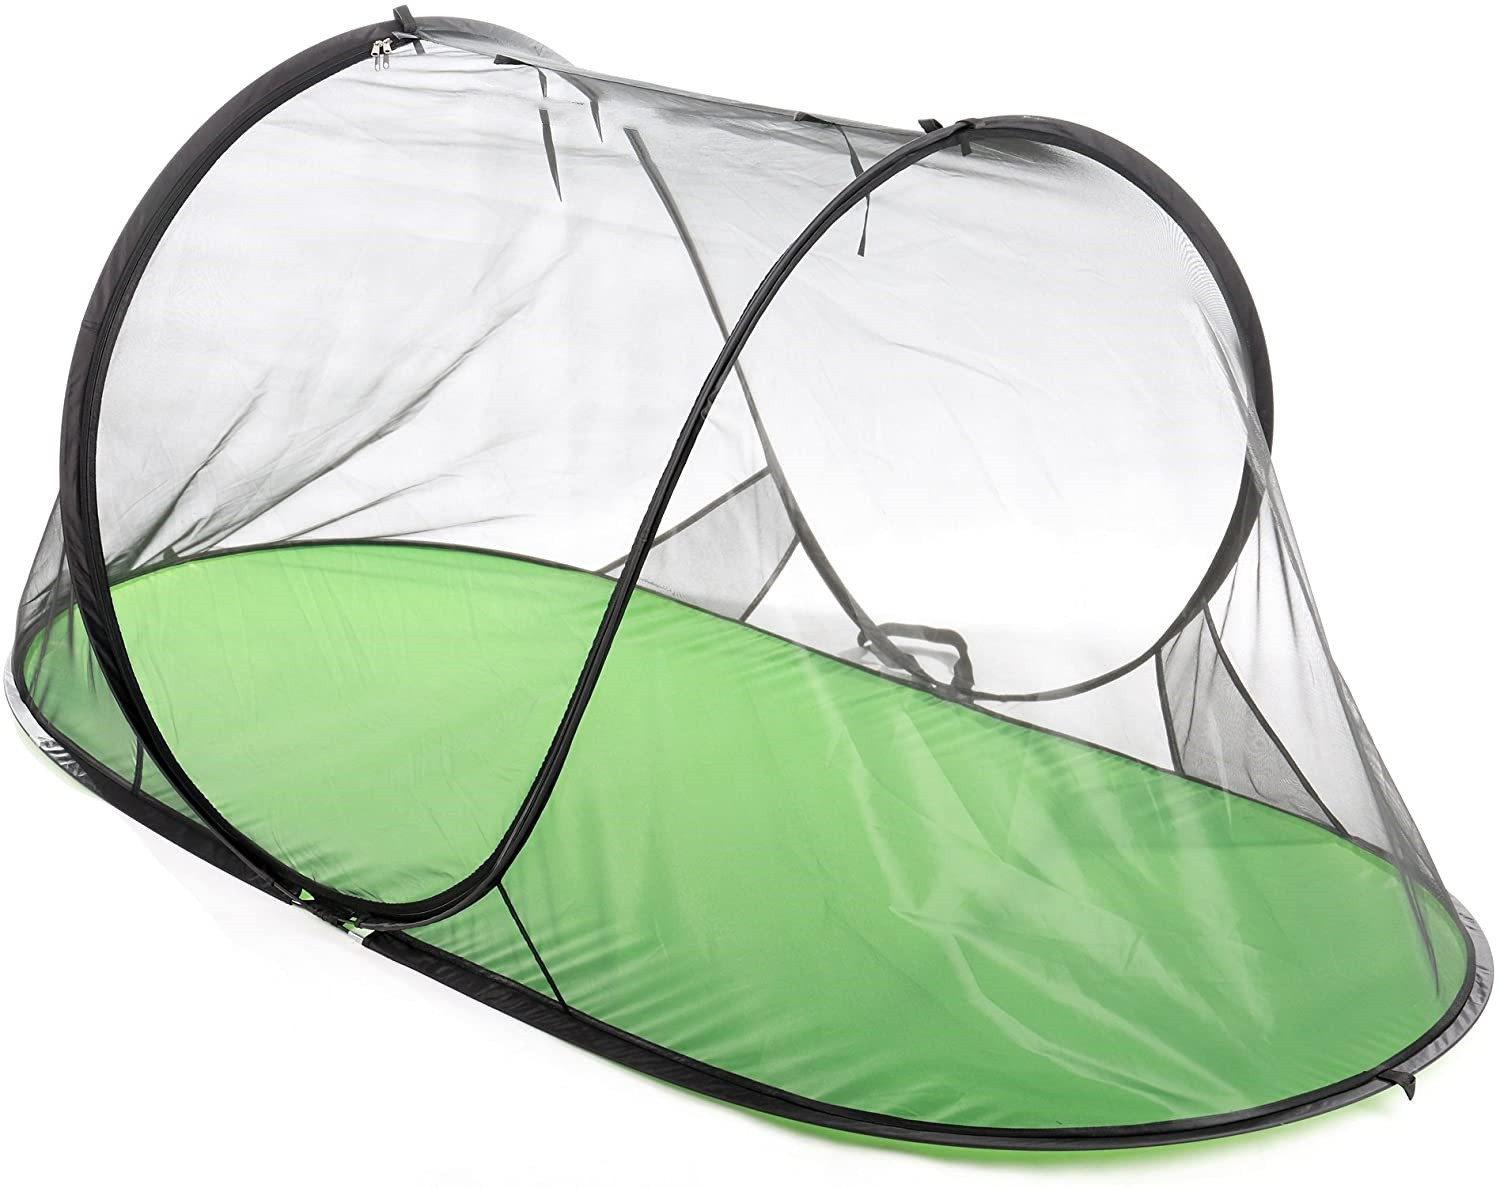 Stand-Alone Mosquito Net Foldable Portable Mosquito Net Tent Pop-up Easy to Use Single Mosquito Net Installation-Free